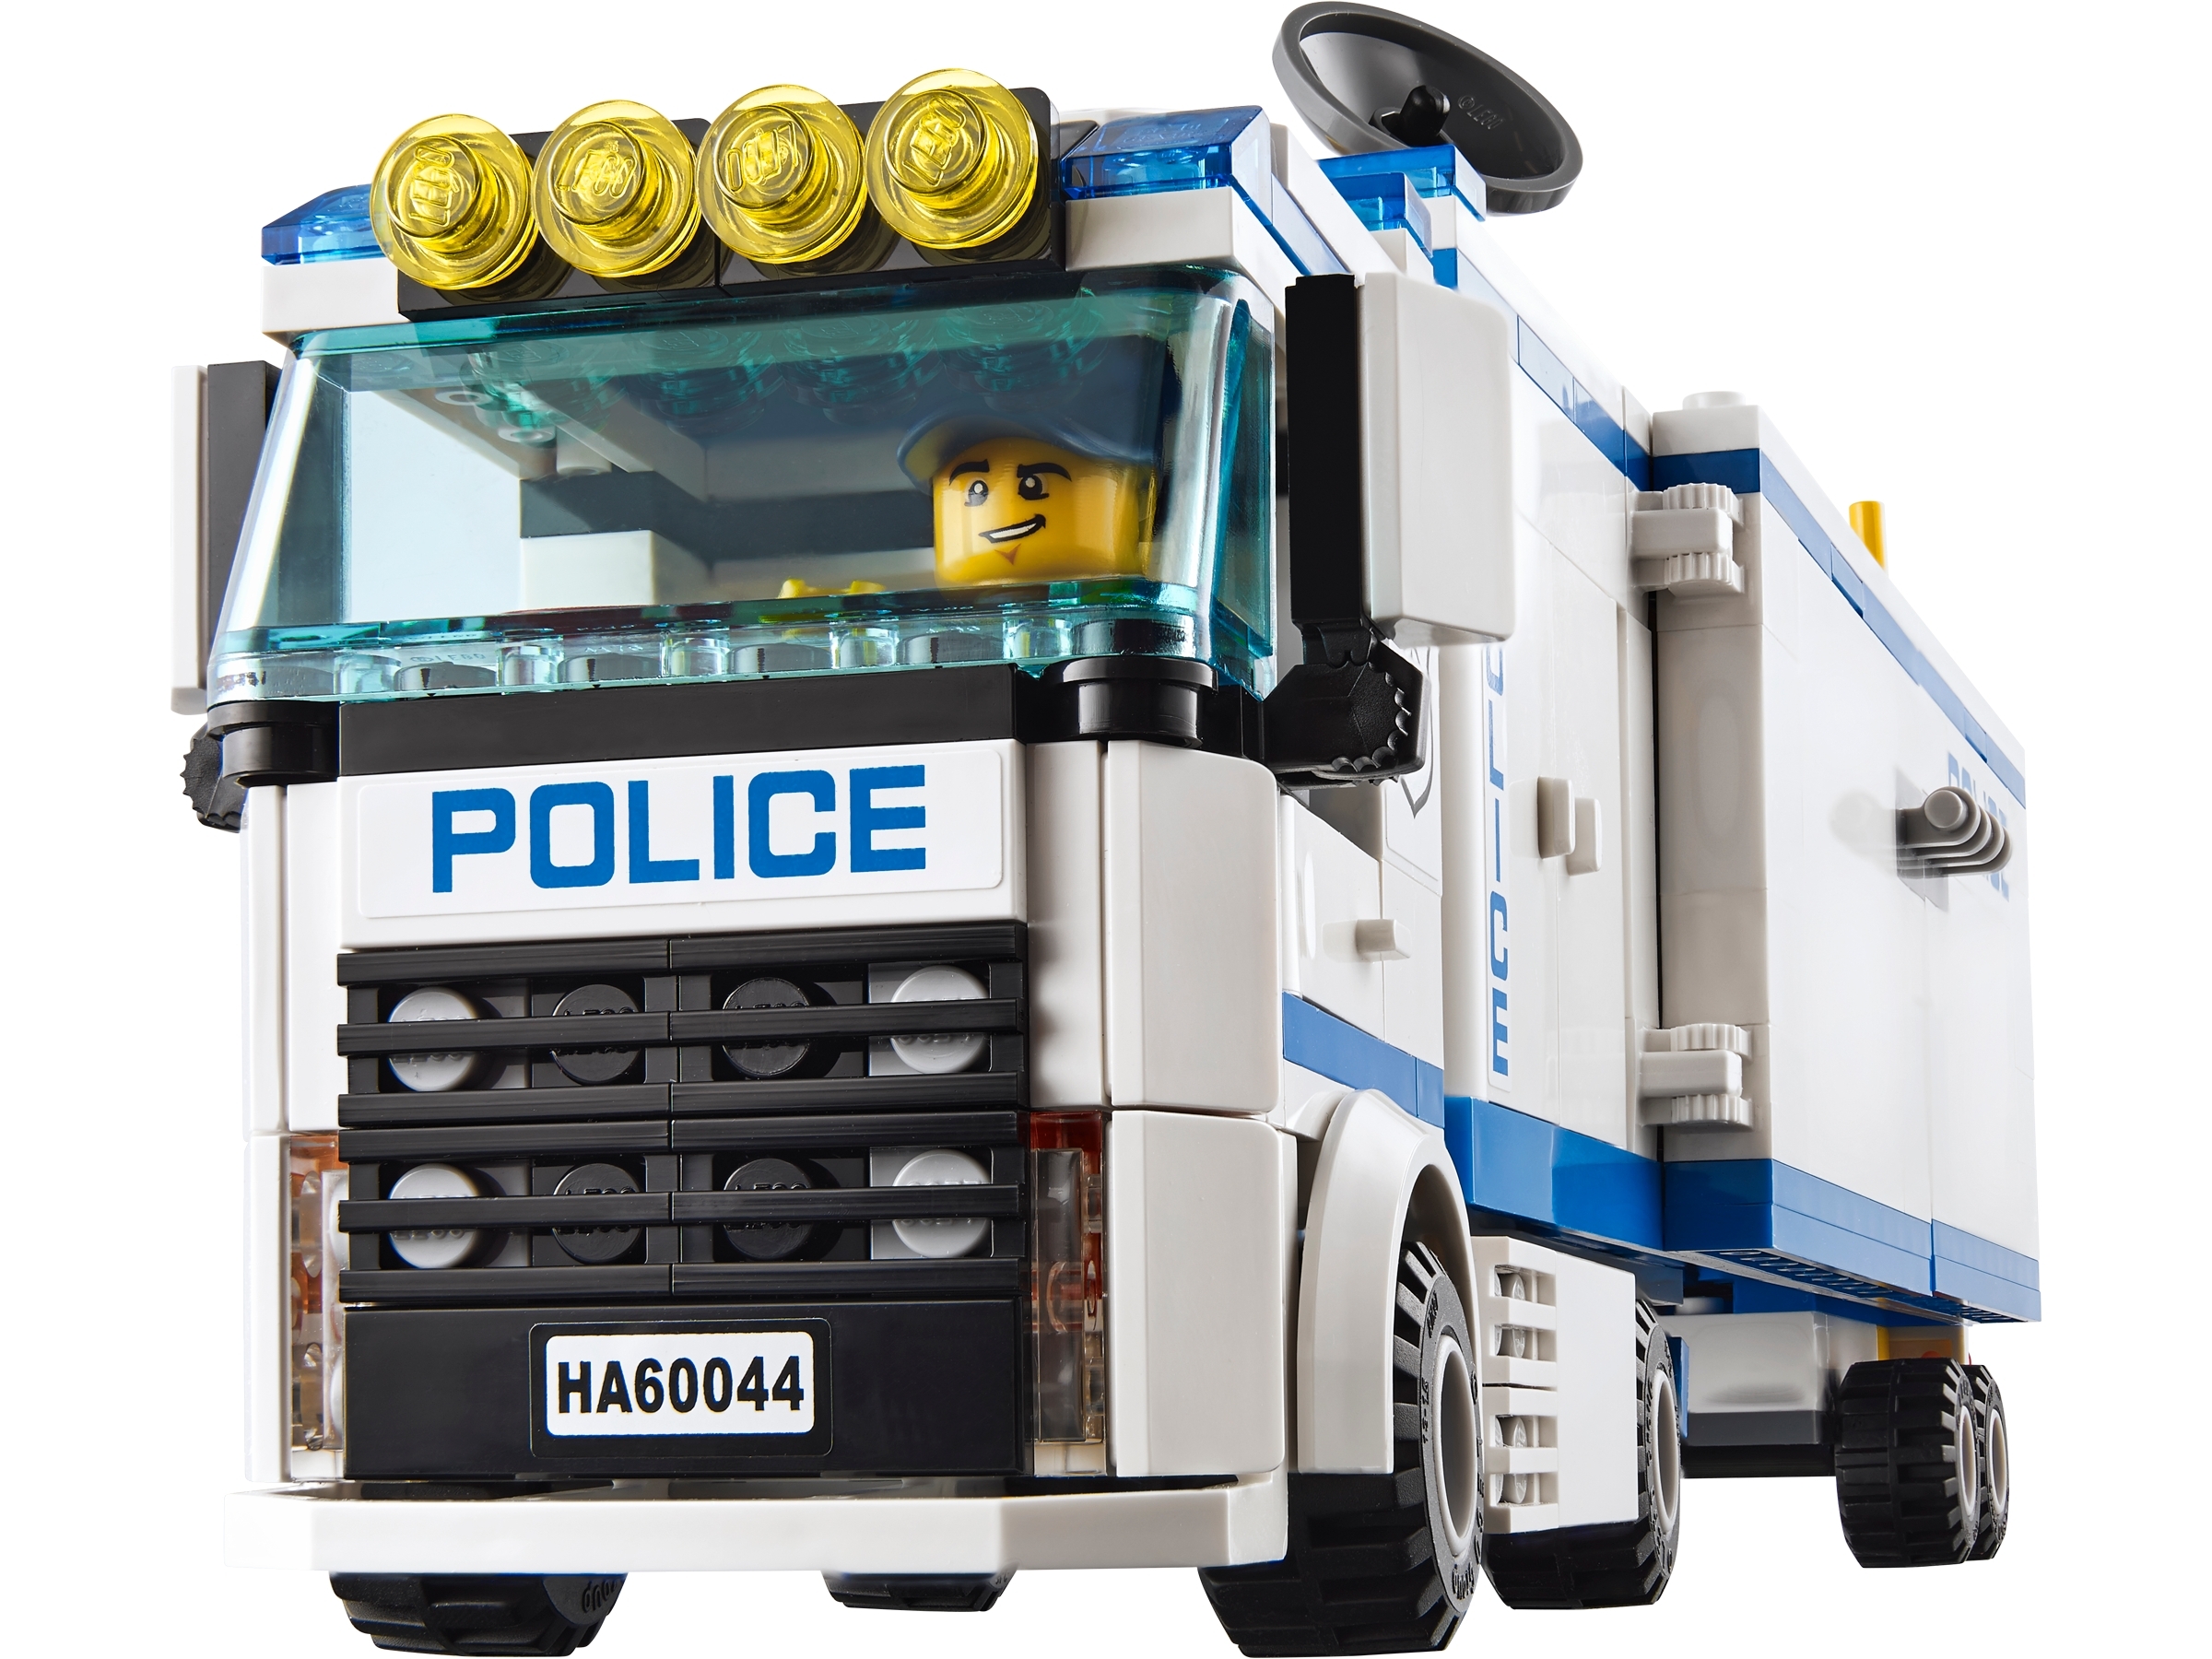 Mobile Police Unit 60044 City | Buy online at the LEGO®